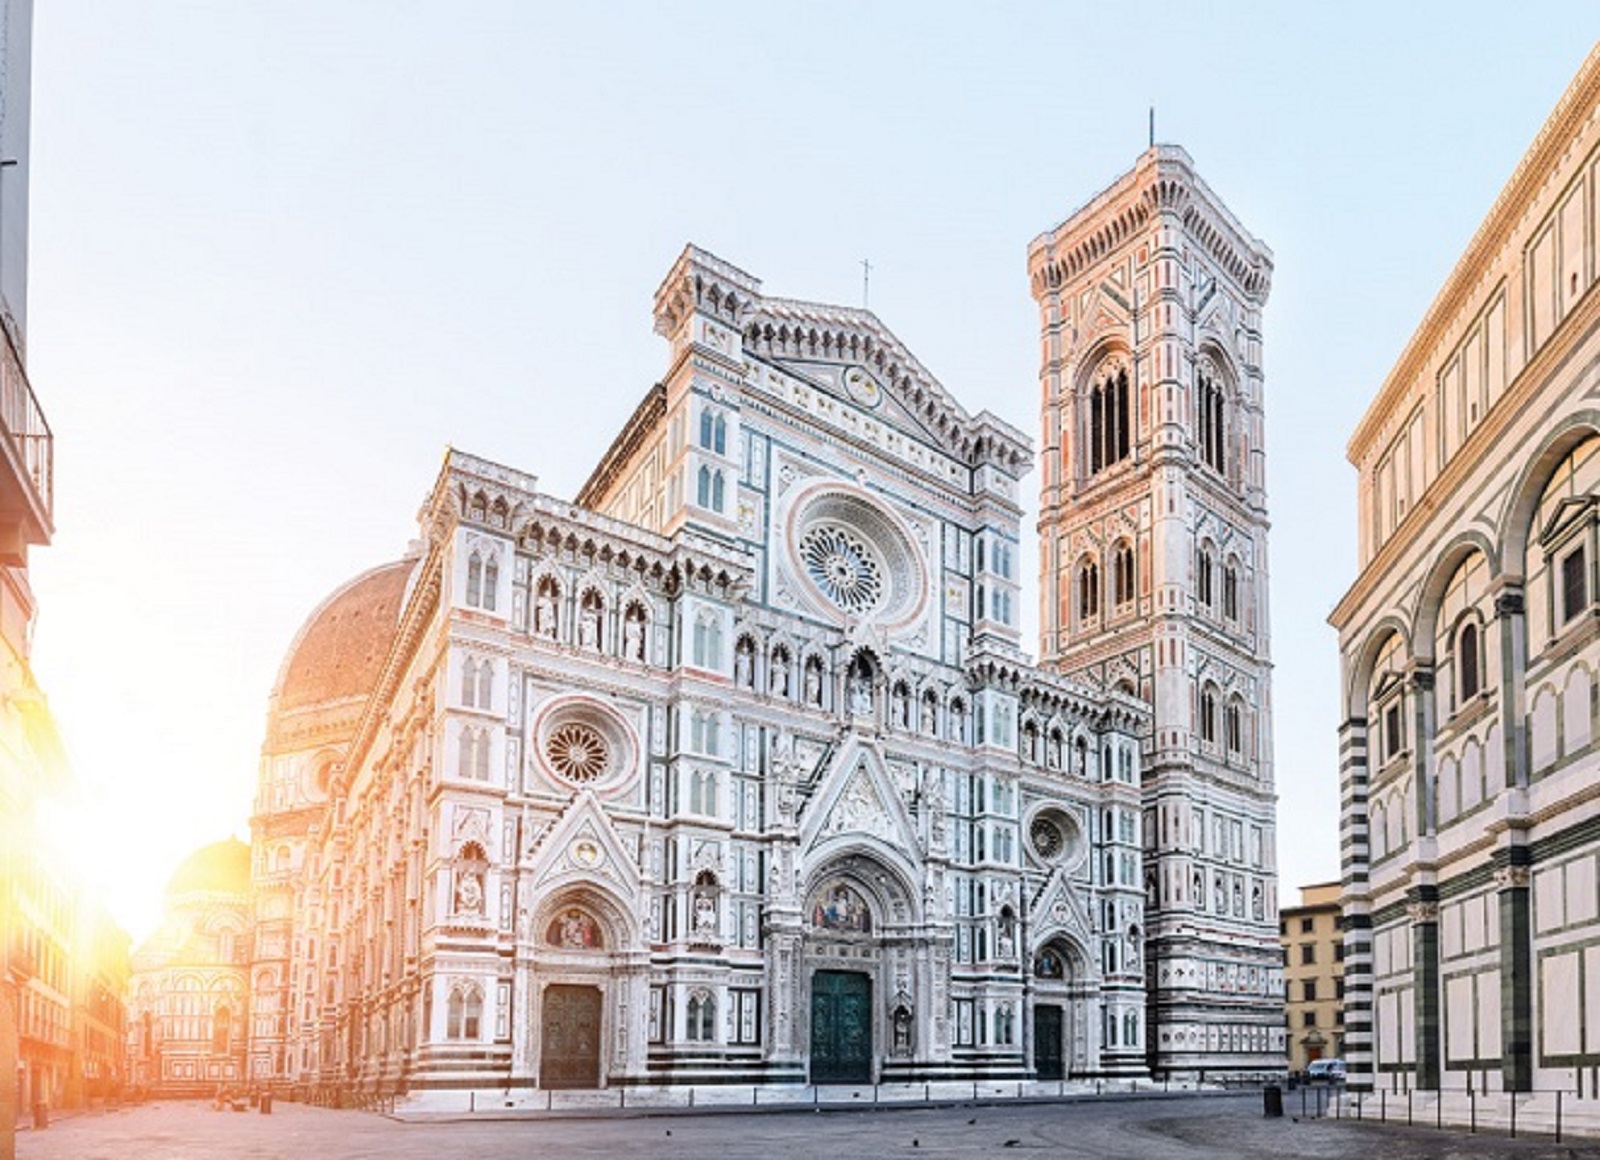 A 2-hour guided bike tour to discover the most iconic sights in the centre of Florence